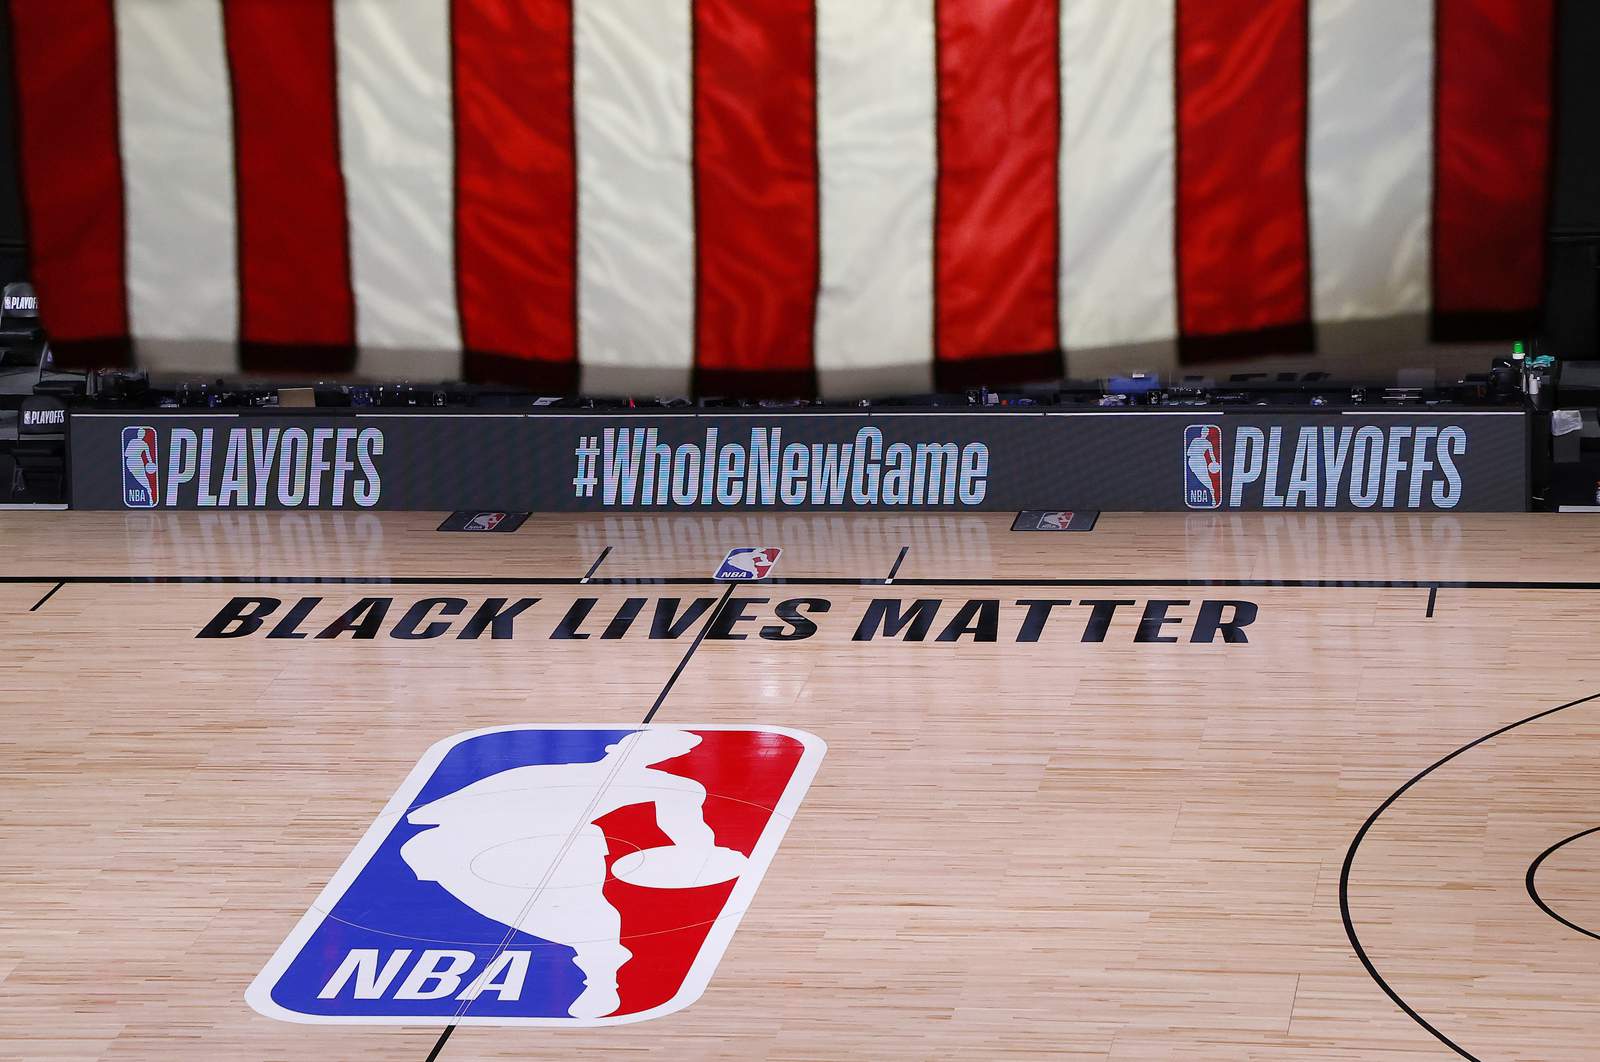 A 2nd day of NBA playoff games halted over racial injustice